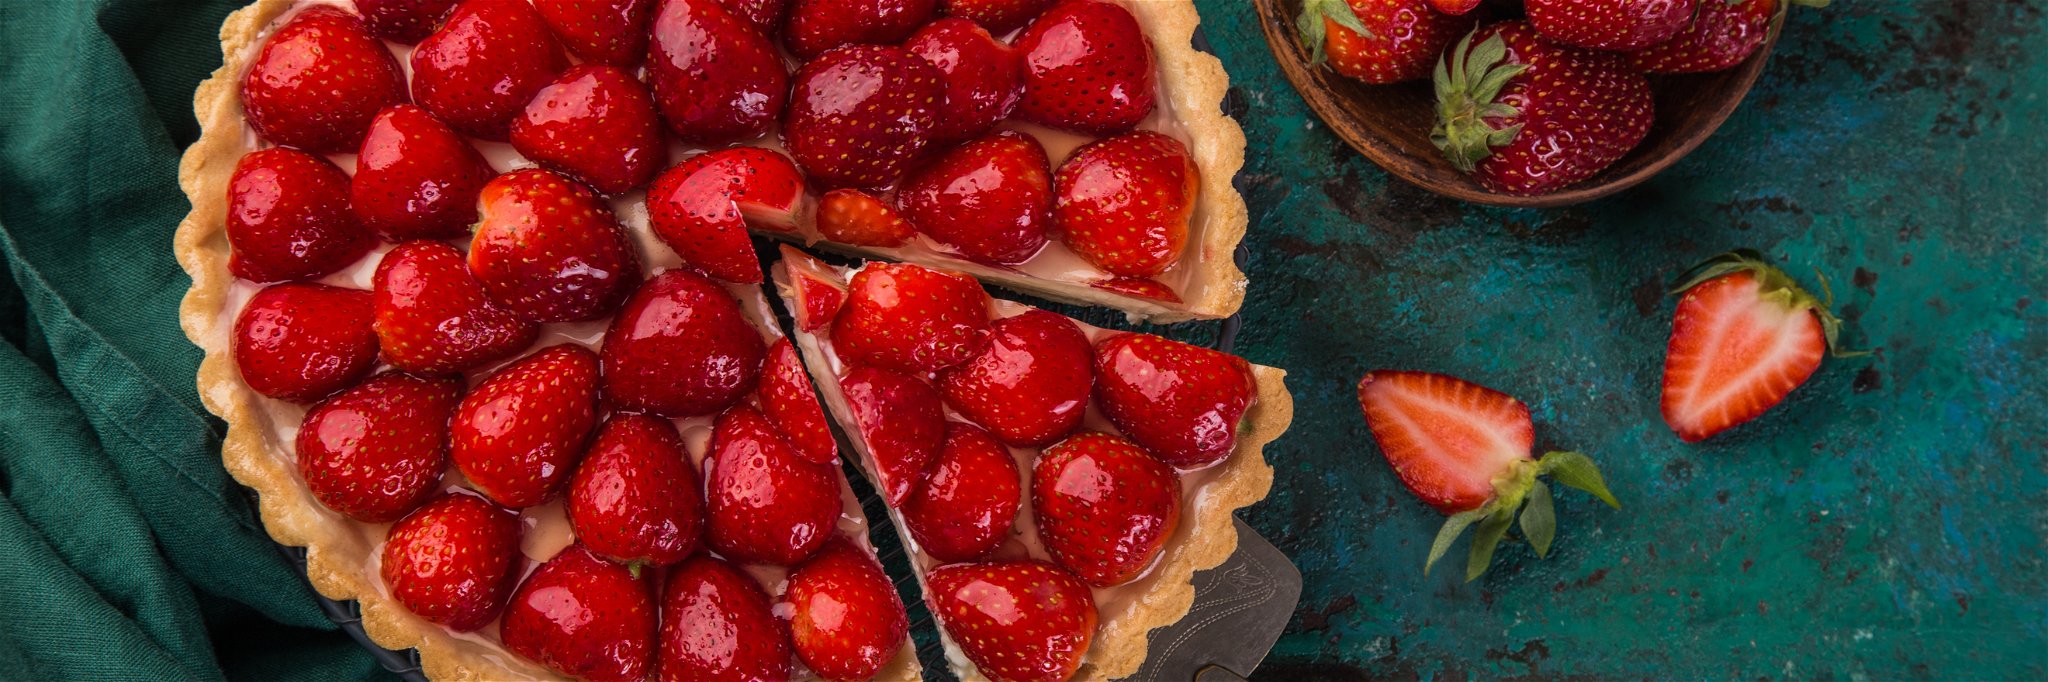 Strawberries make a mouth-watering dessert